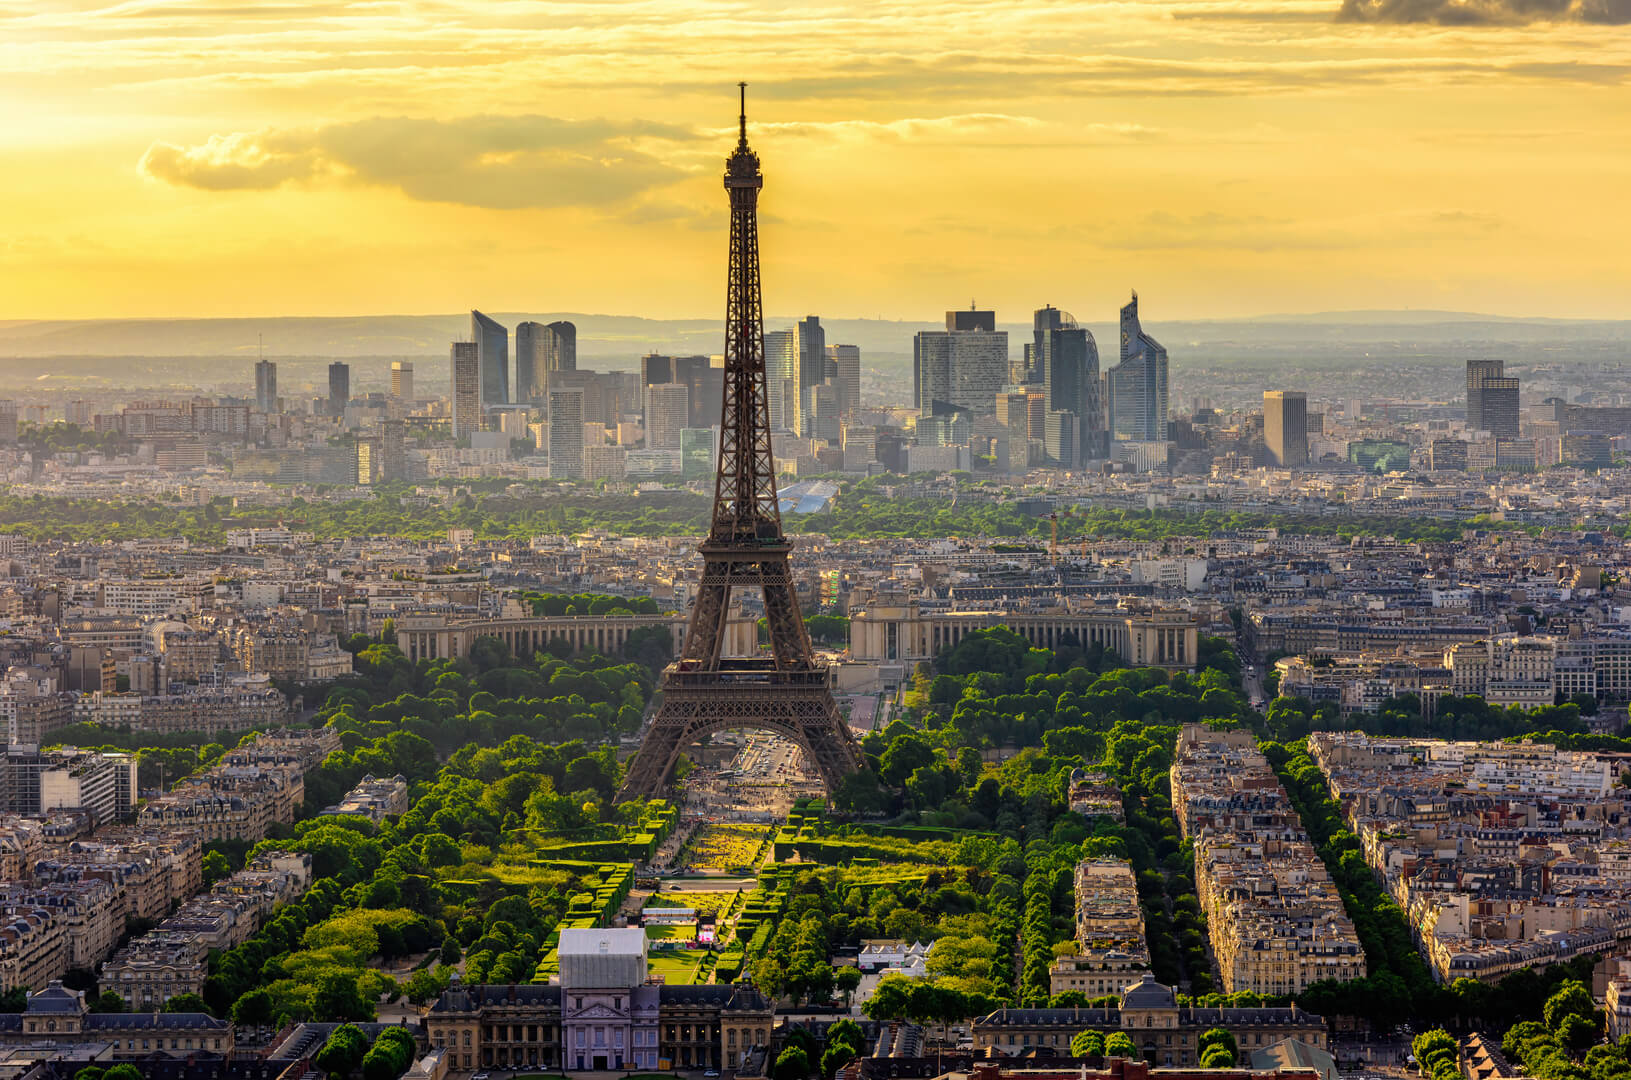 Skyline of Paris with Eiffel Tower at sunset in Paris, France. Eiffel Tower is one of the most iconic landmarks of Paris.